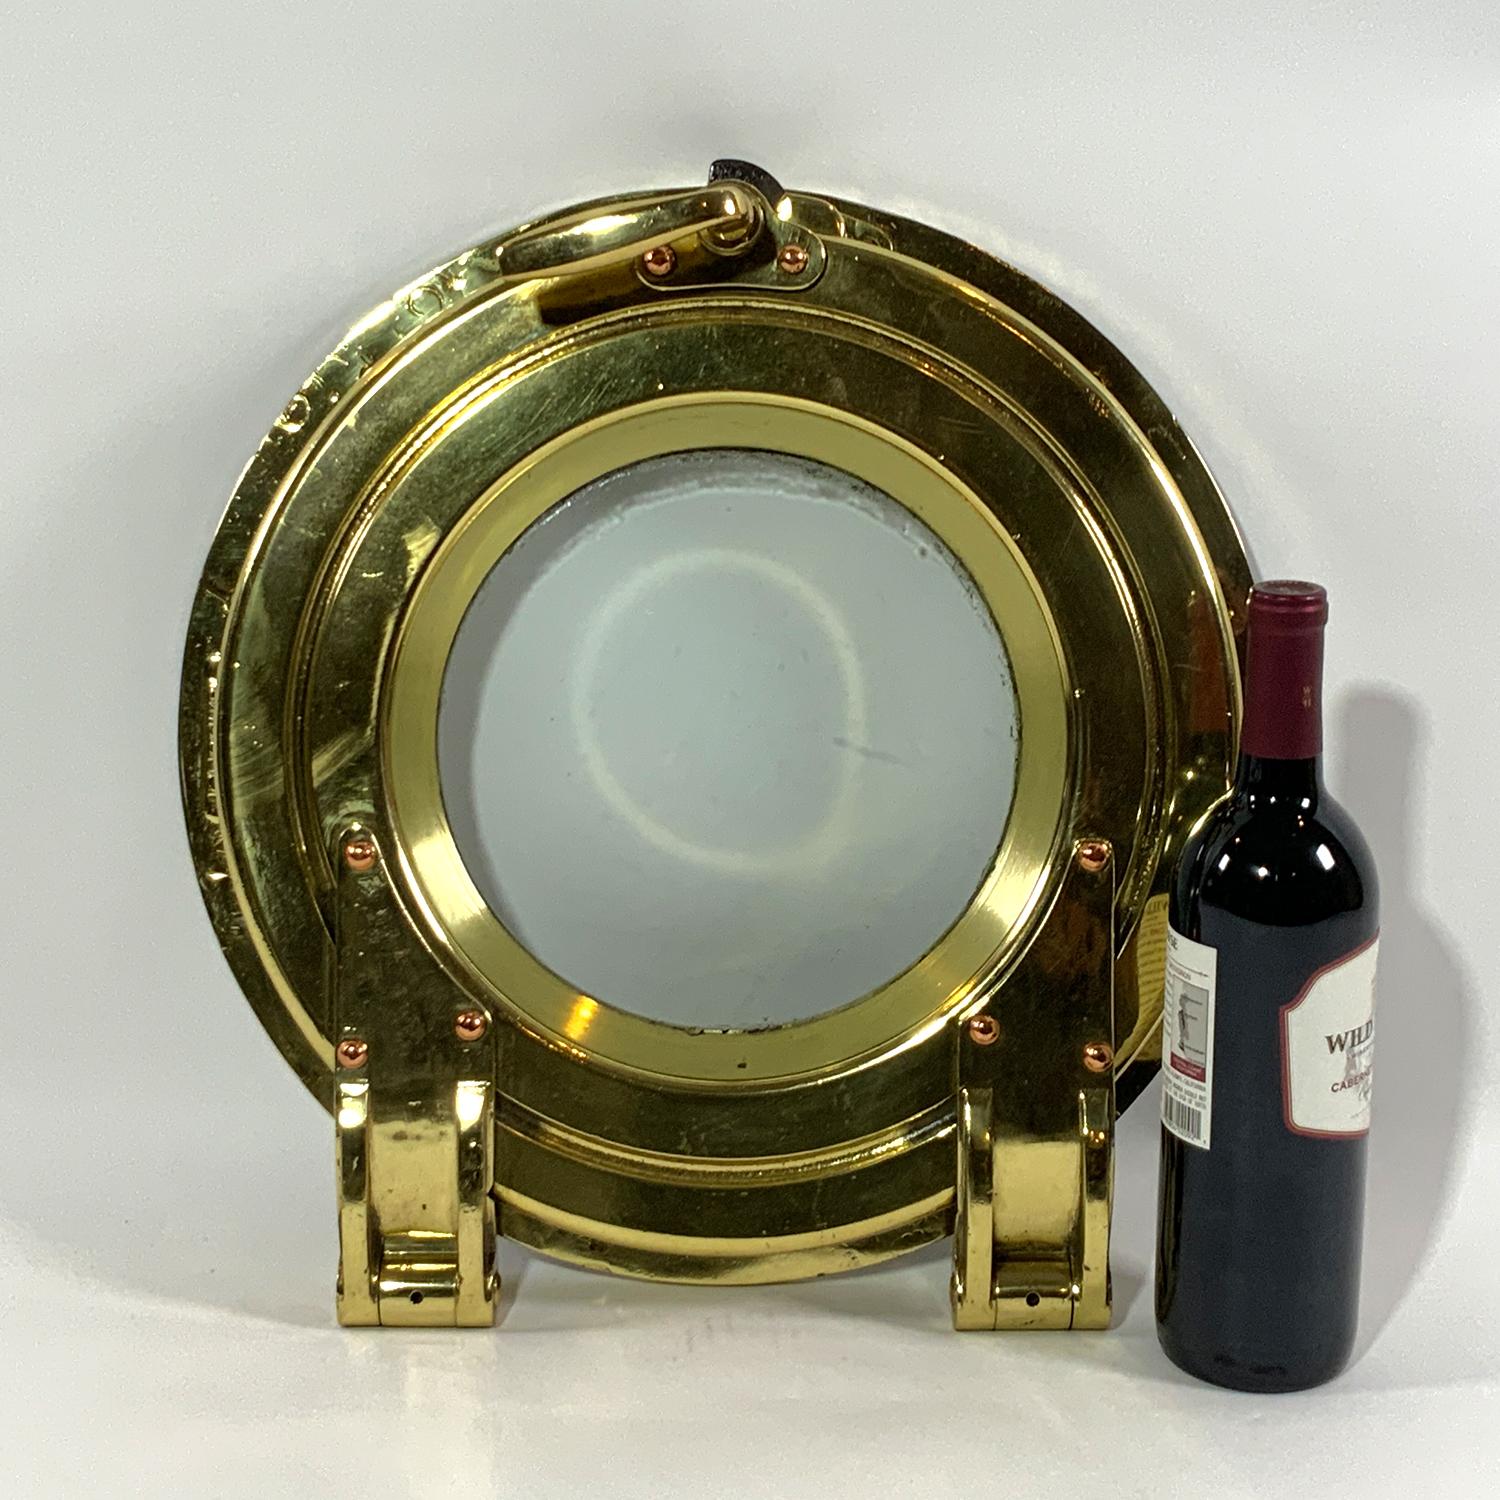 North American Yacht Porthole Solid Brass Highest Quality For Sale